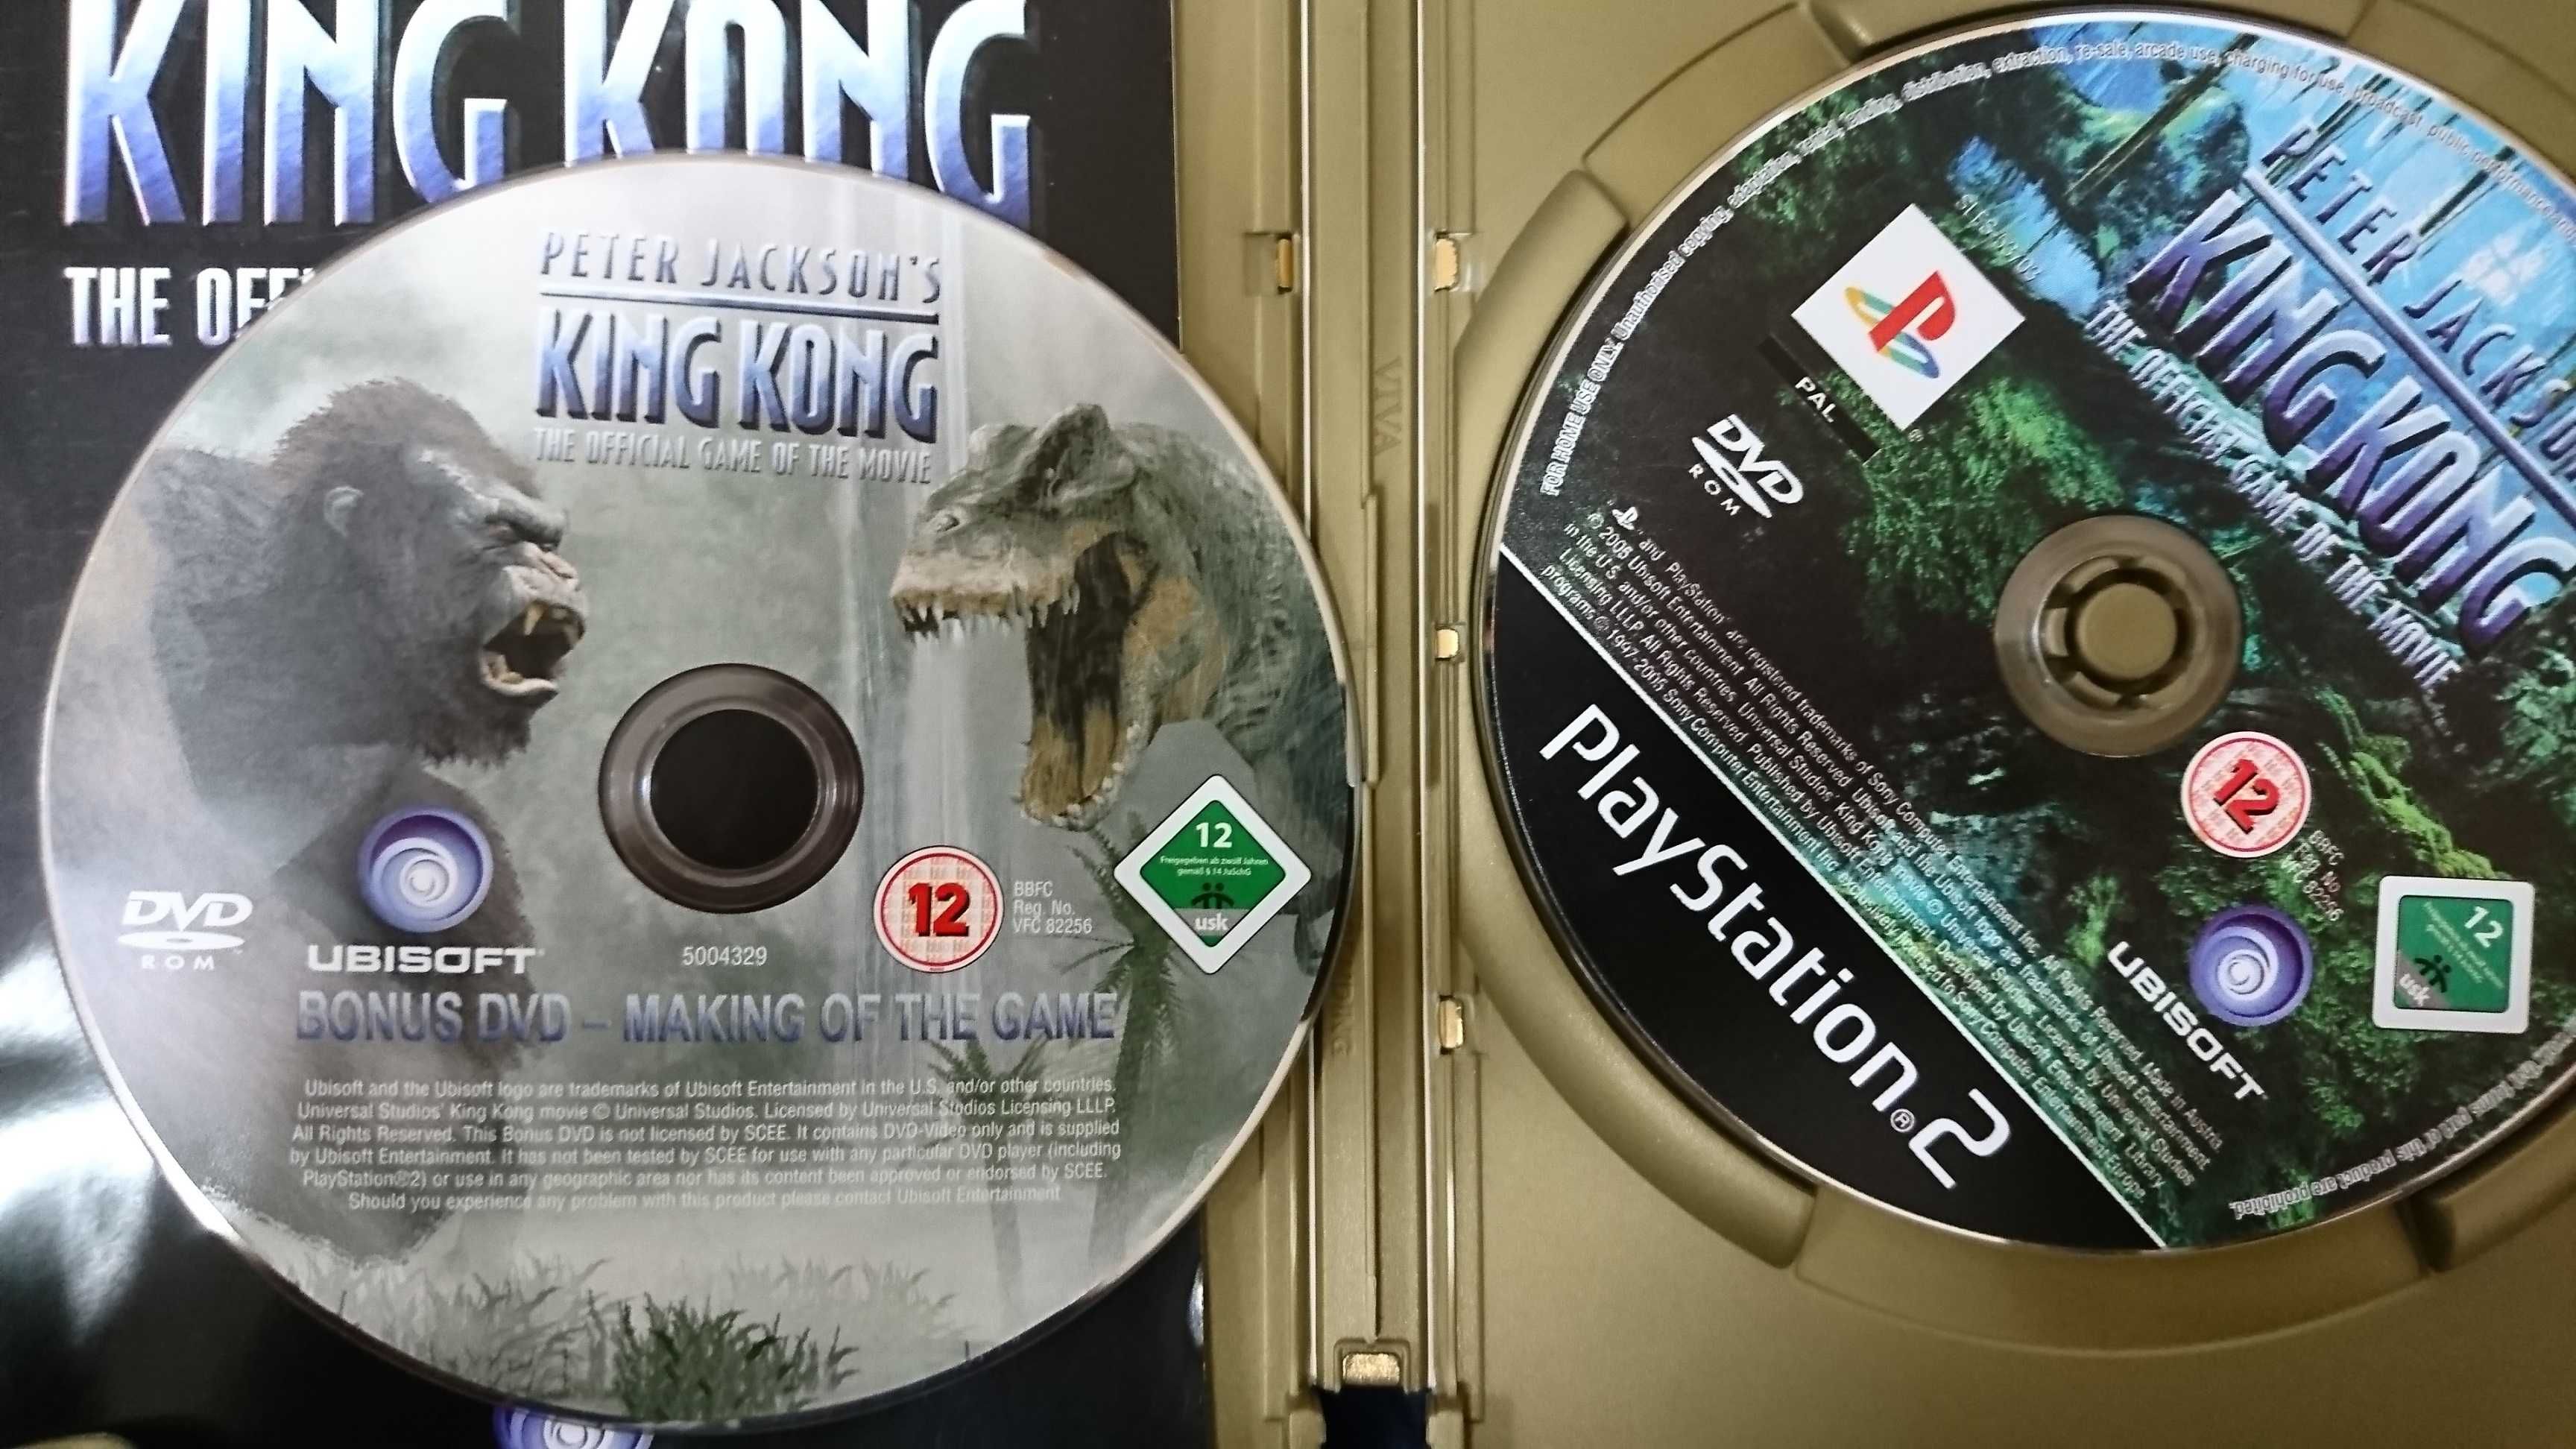 Peter Jackson's King Kong Limited Collector's Edition Steelbook ps2